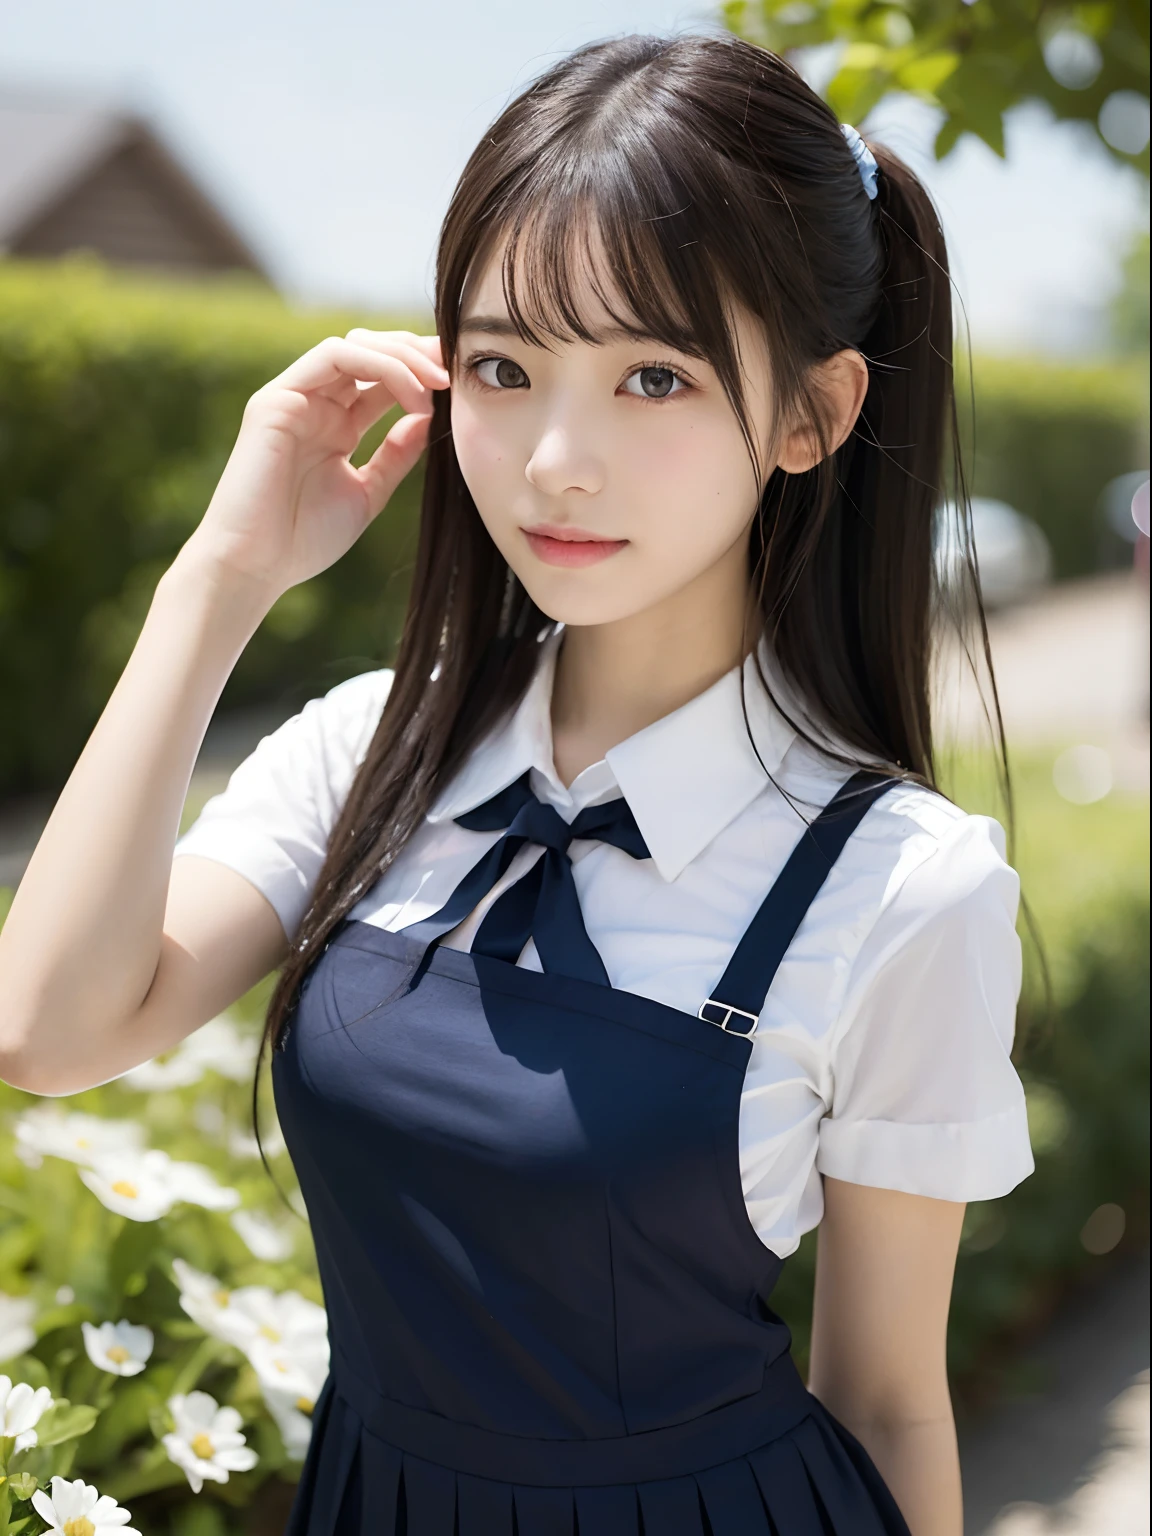 (Close up portrait of twin-tailed hair girl with slender small breasts in summer uniform:1.3)、(without background:1.3)、(tre anatomically correct:1.3)、(complete hands:1.3)、(complete fingers:1.3)、Photorealsitic、Raw photography、masutepiece、top-quality、Hi-Res、delicate and pretty、face perfect、Beautiful detailed eyes、Fair skin、Real Human Skin、pores、((thin legs))、(Dark hair)